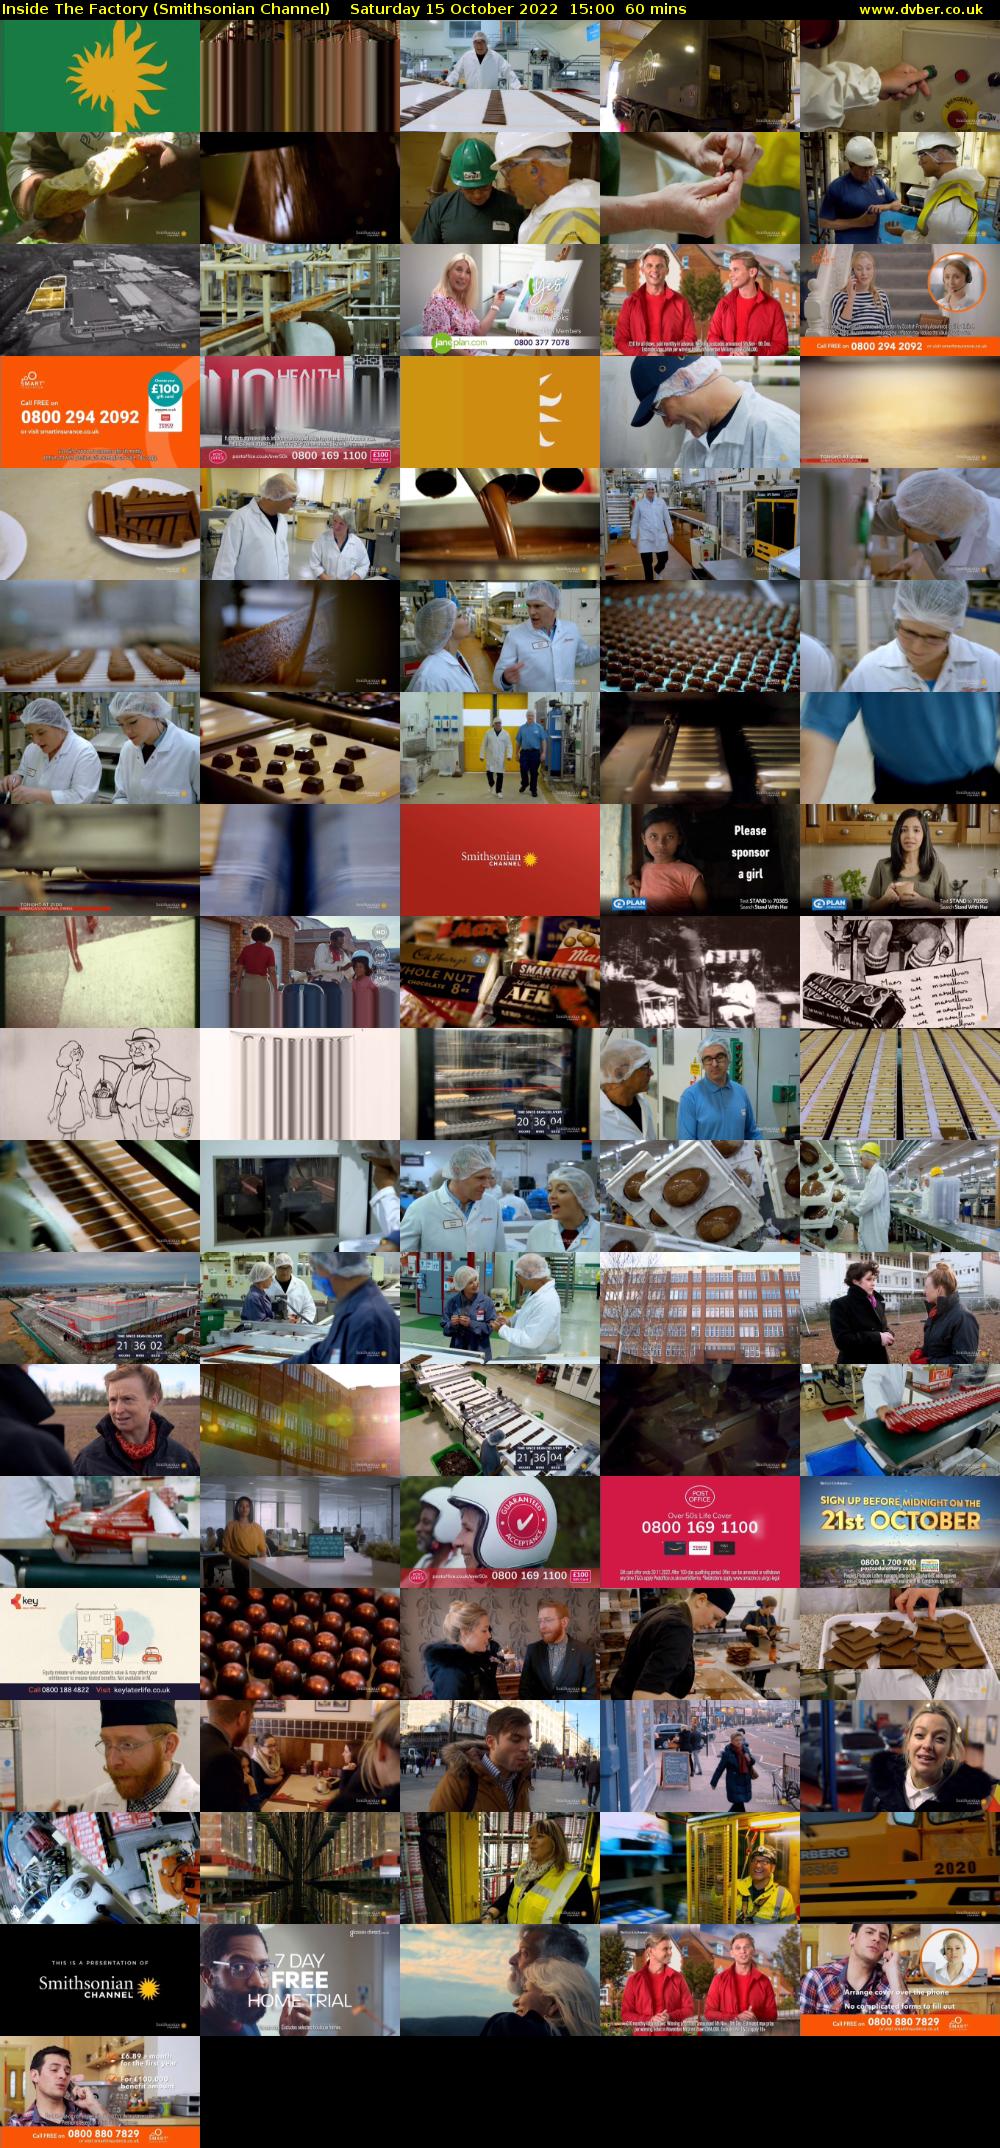 Inside The Factory (Smithsonian Channel) Saturday 15 October 2022 15:00 - 16:00